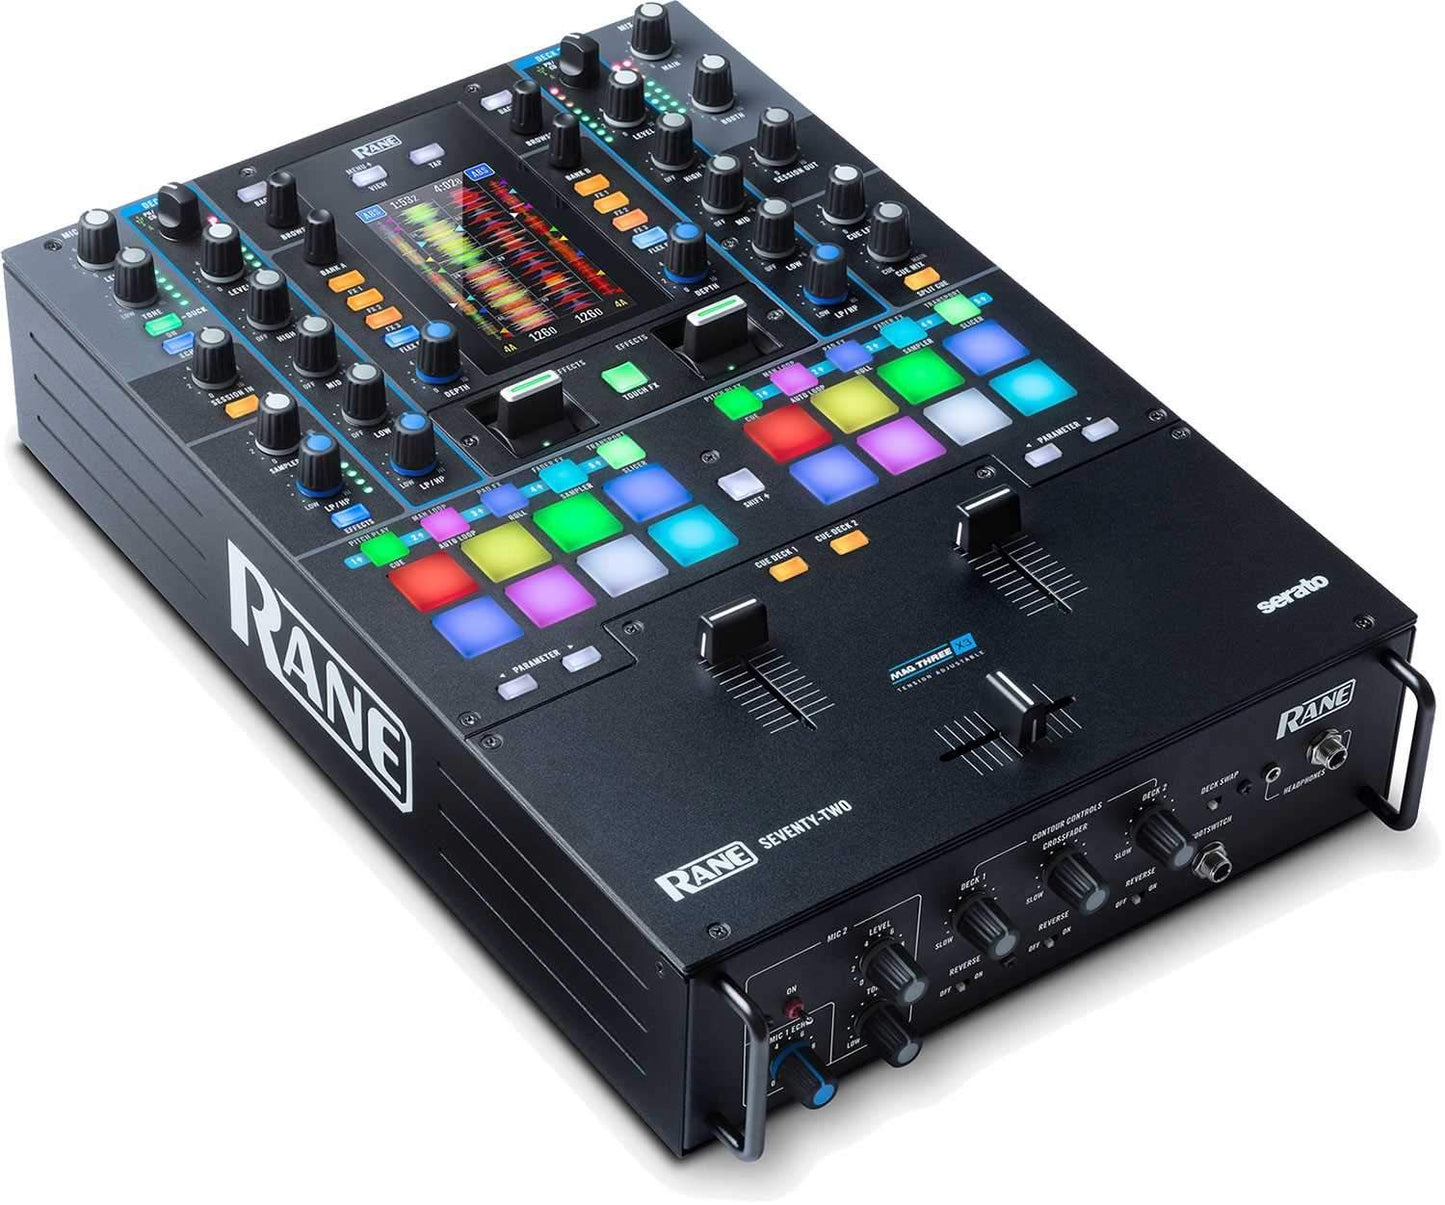 RANE Seventy Two 2-Deck Performance DJ Mixer with Touch Screen - PSSL ProSound and Stage Lighting